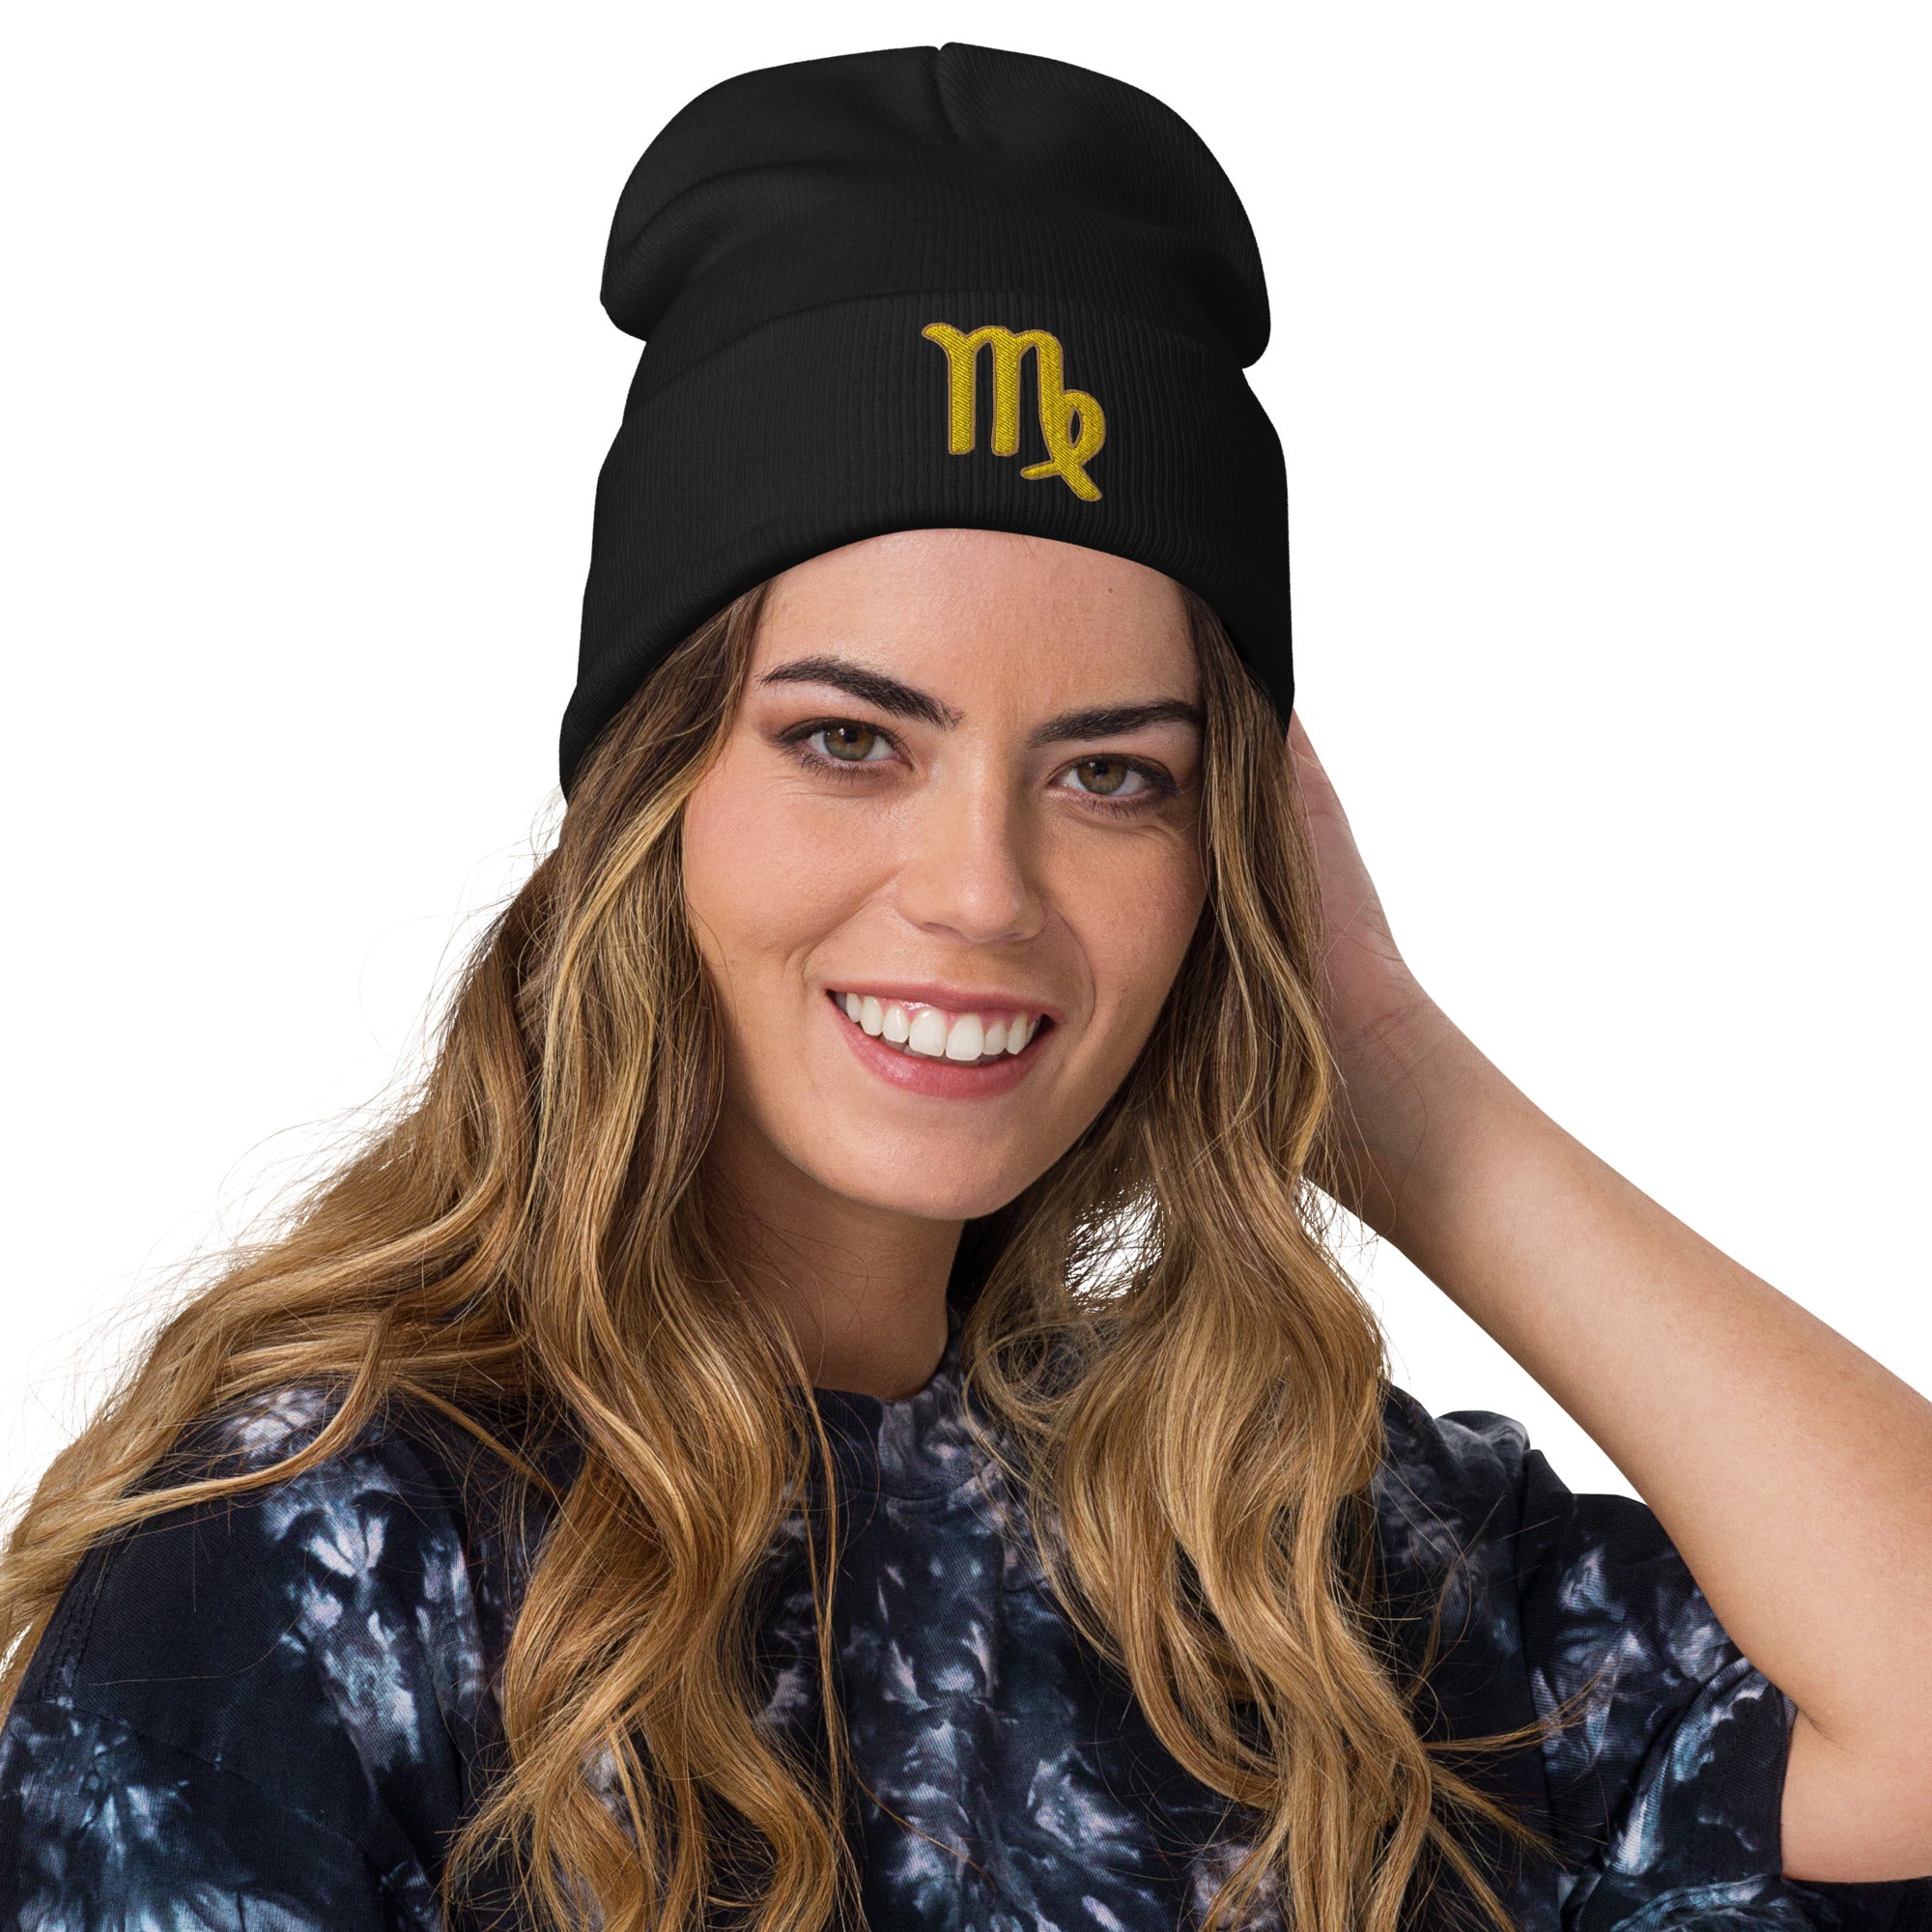 Zodiac Sign Virgo Embroidered Cuff Beanie Astrology Horoscope Yellow Brown Thread - Edge of Life Designs